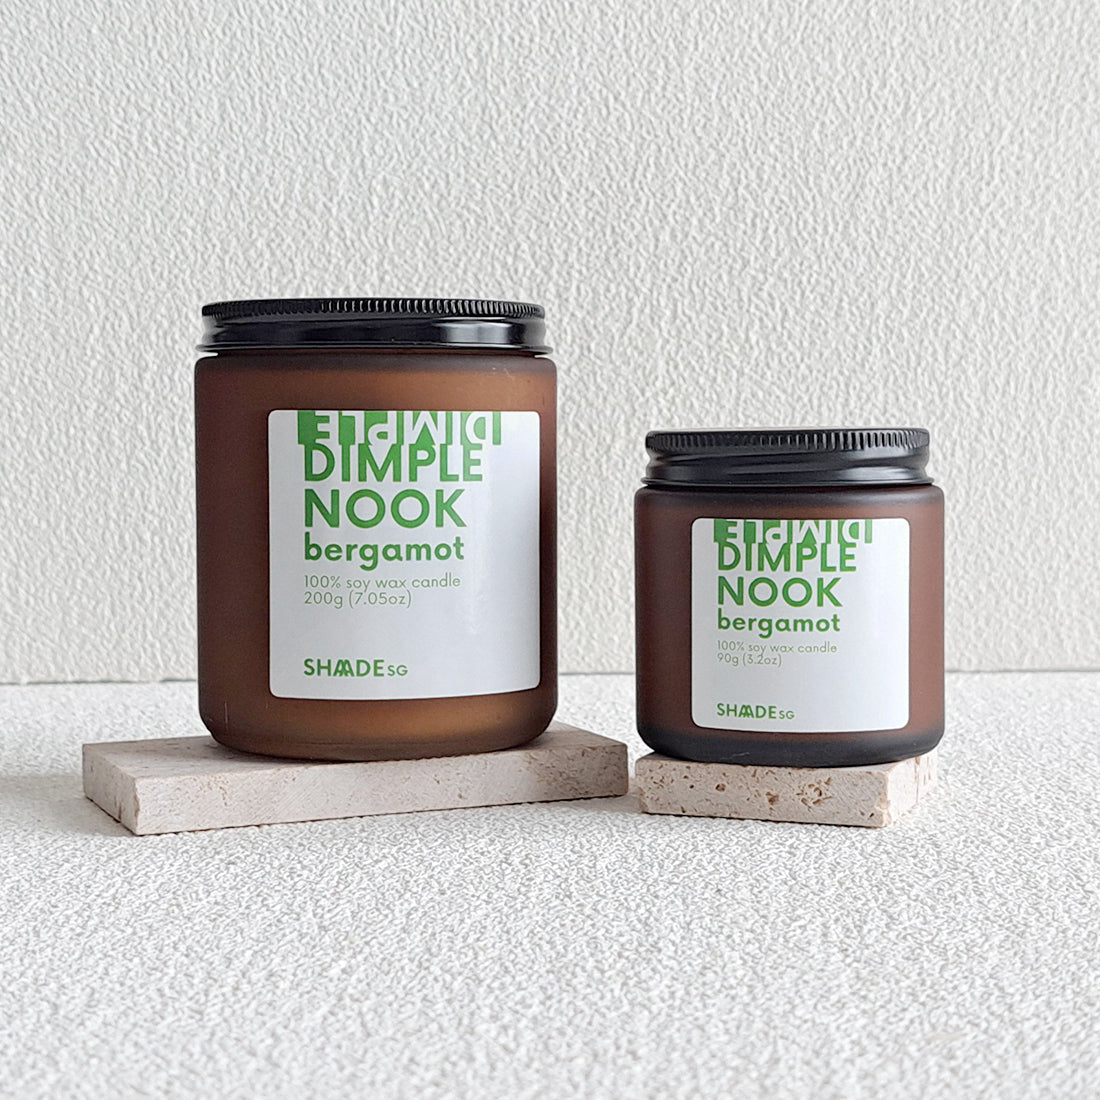 dimple nook bergamot soy wax scented candle